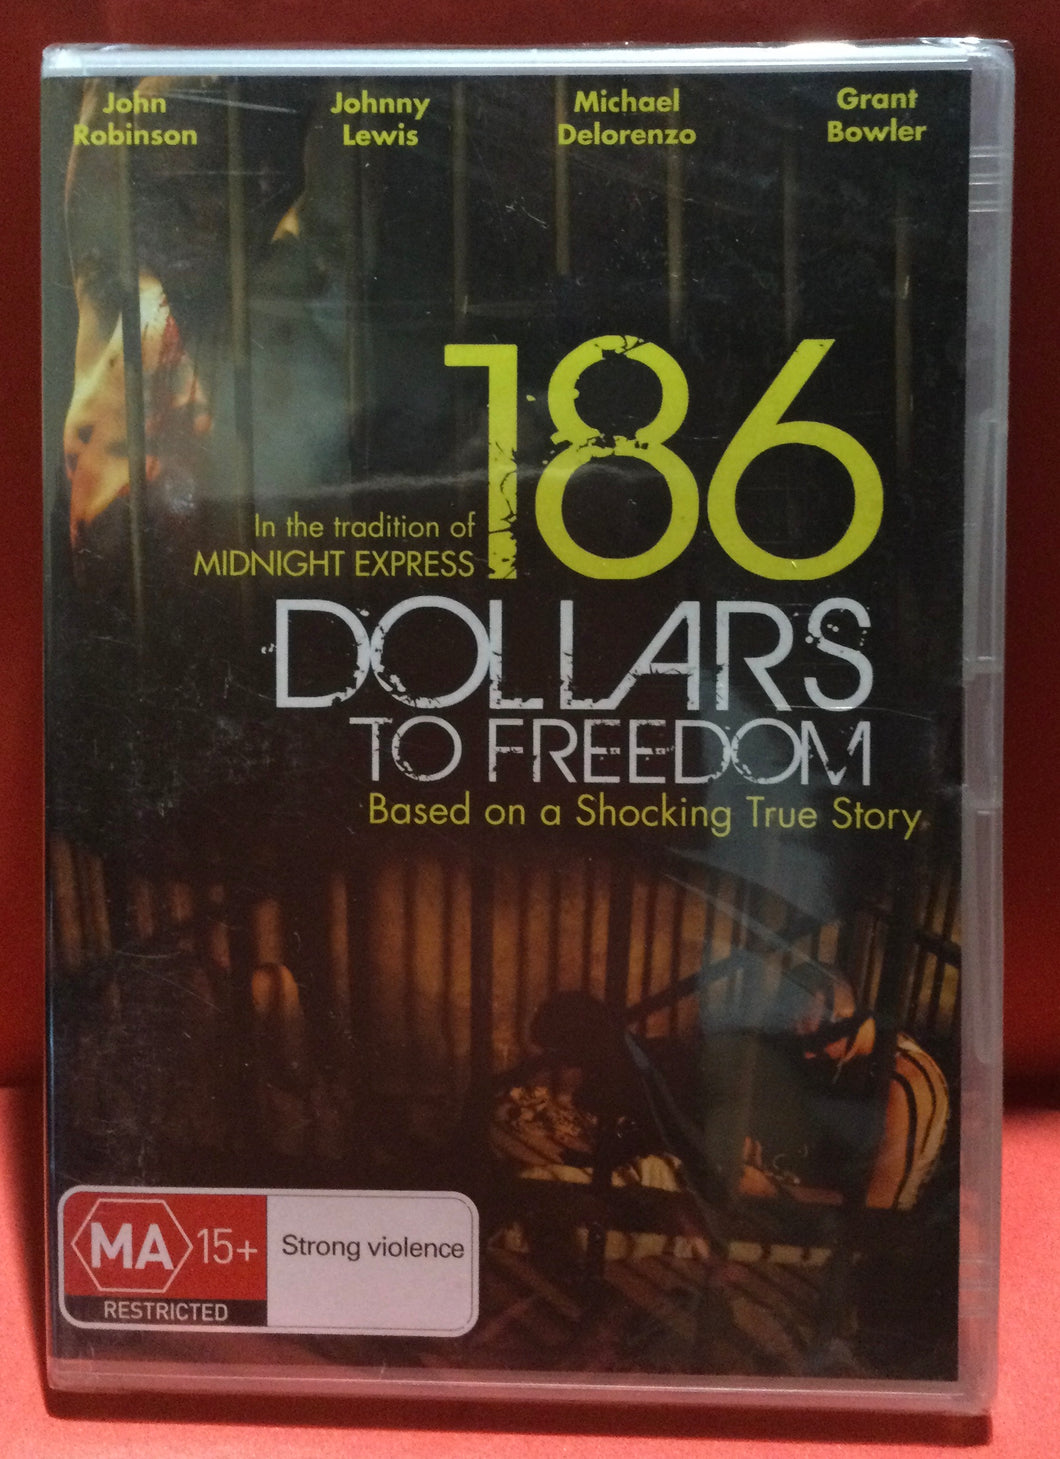 186 DOLLARS TO FREEDOM - DVD (SEALED)